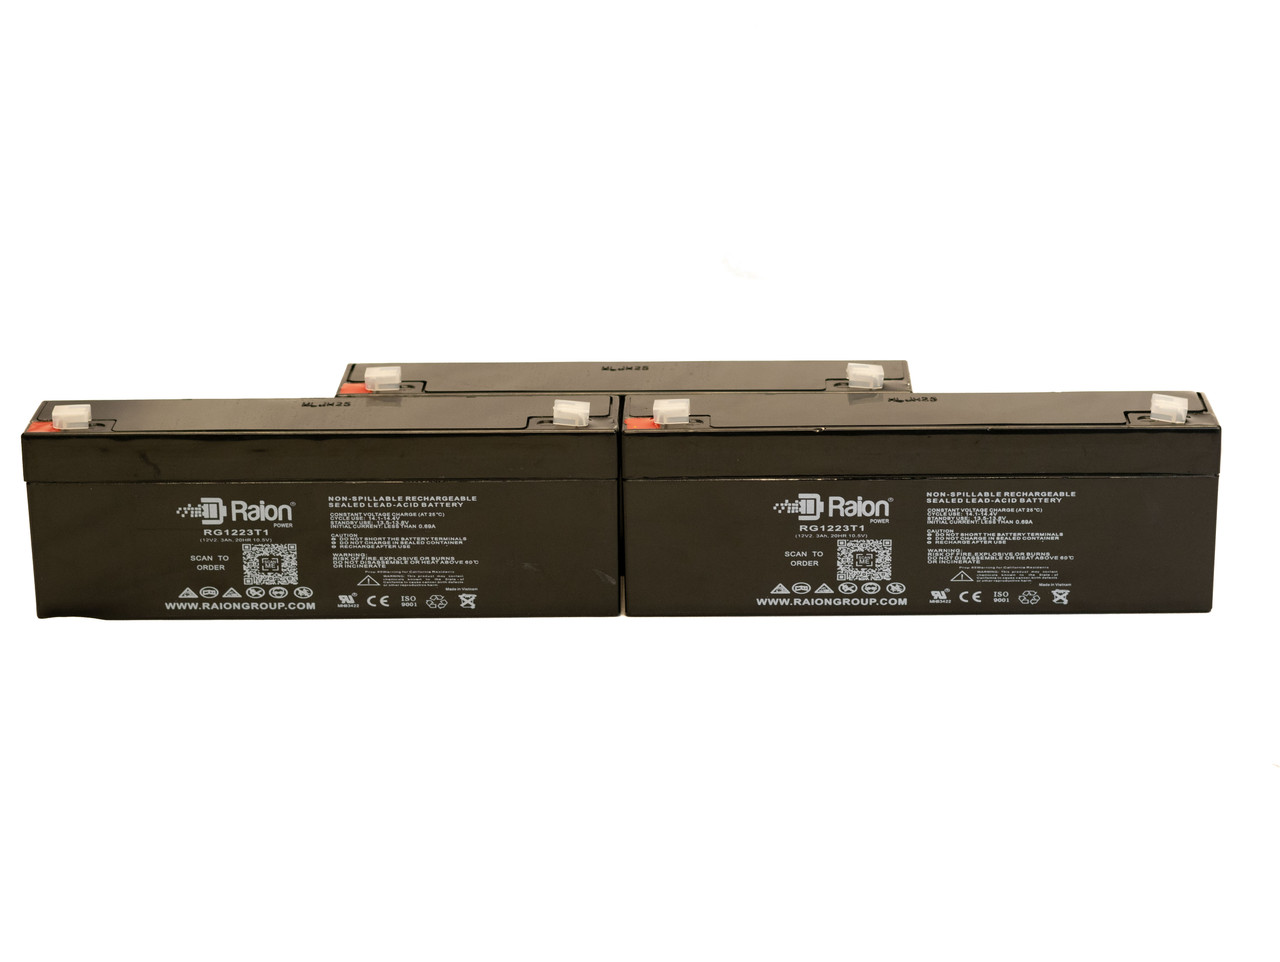 Raion Power 12V 2.3Ah RG1223T1 Replacement Medical Battery for Criticare Systems 5070P VSM - 3 Pack